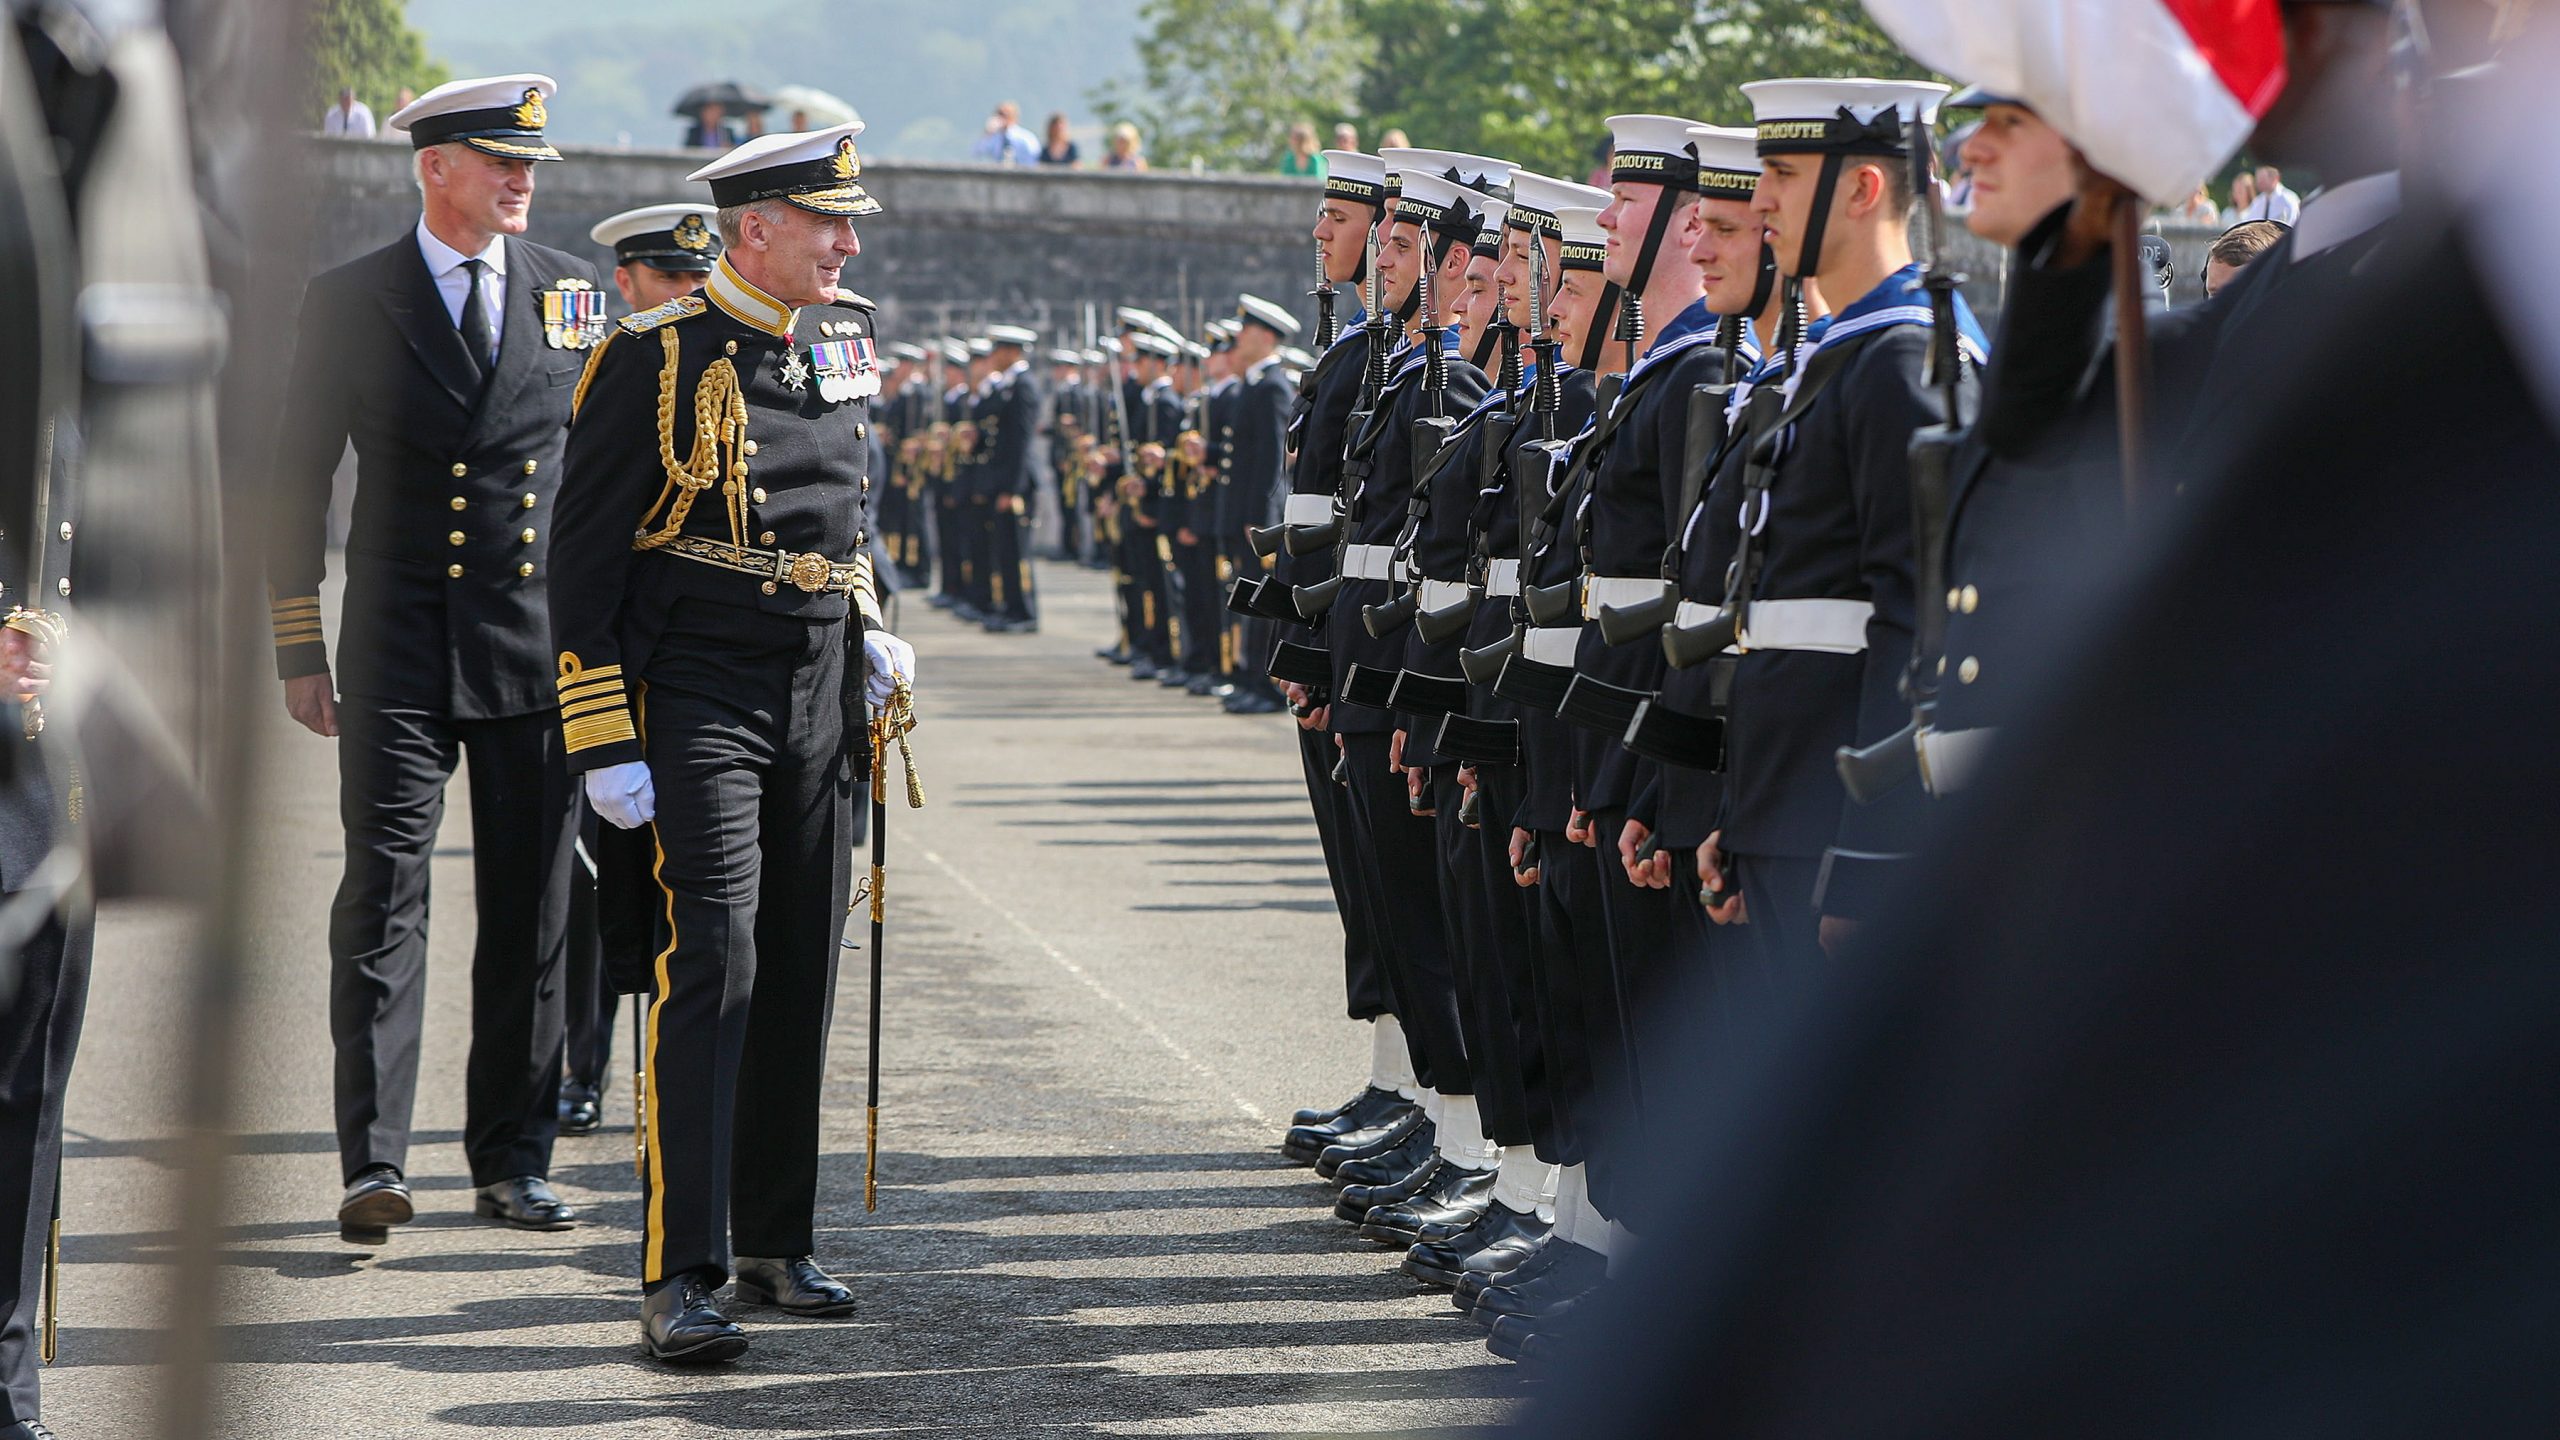 Sailors And Officers Appear In Same Pass Out Parade For First Time In History Of The Royal Navy